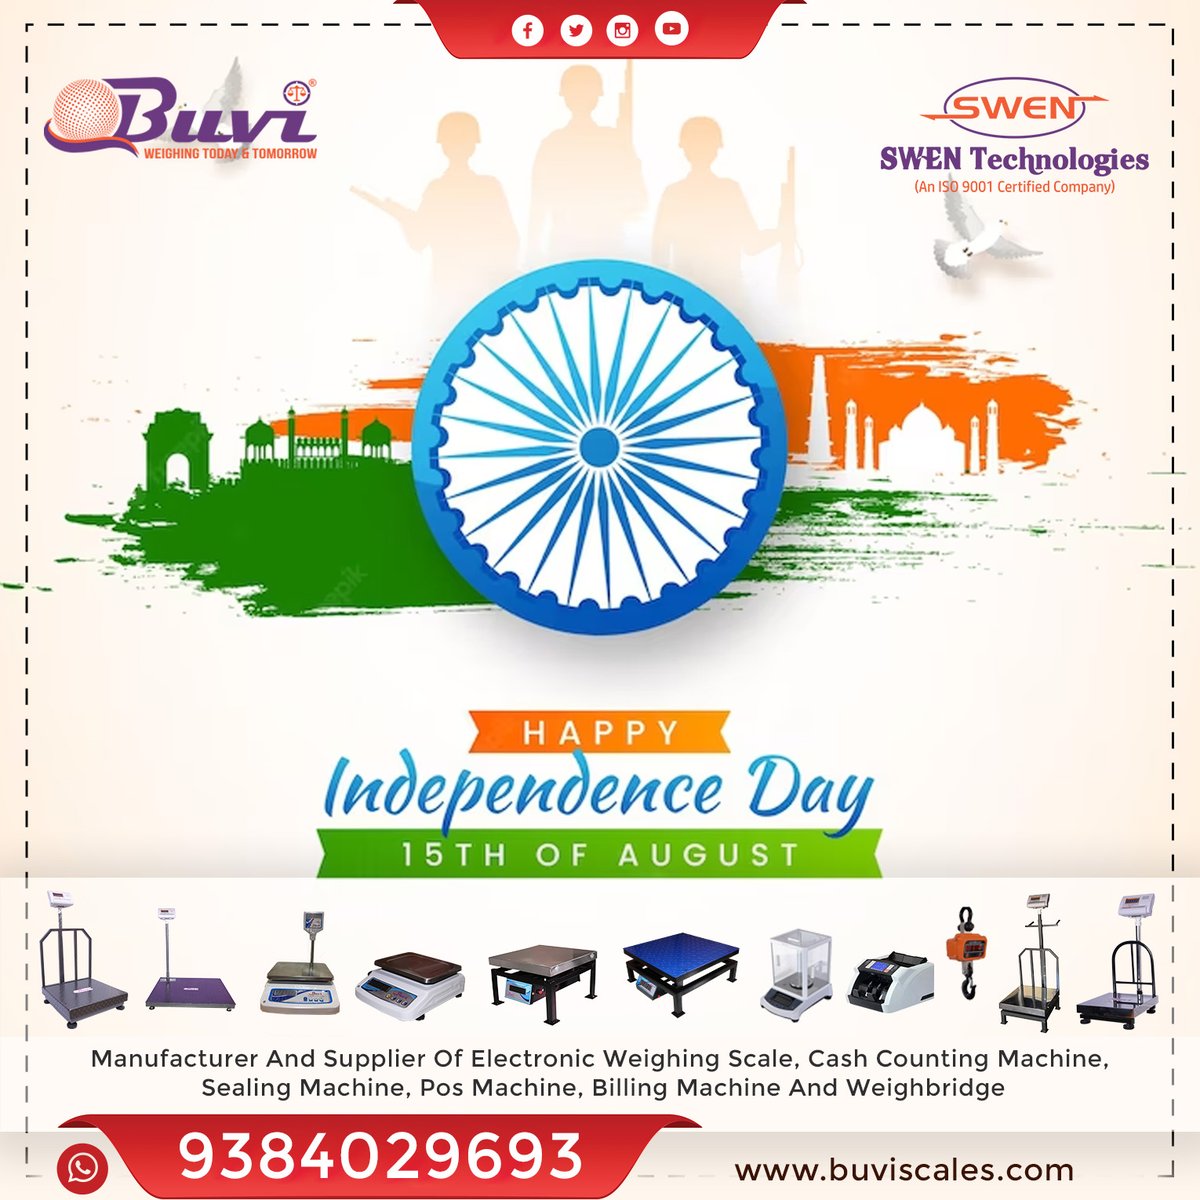 🔔 Come together to cherish the freedom we enjoy and work towards a brighter, more prosperous future for all. Happy Independence Day to you and your loved ones!
#IndependenceDay #ProudToBeIndian #swentechnologies #Weighingscales